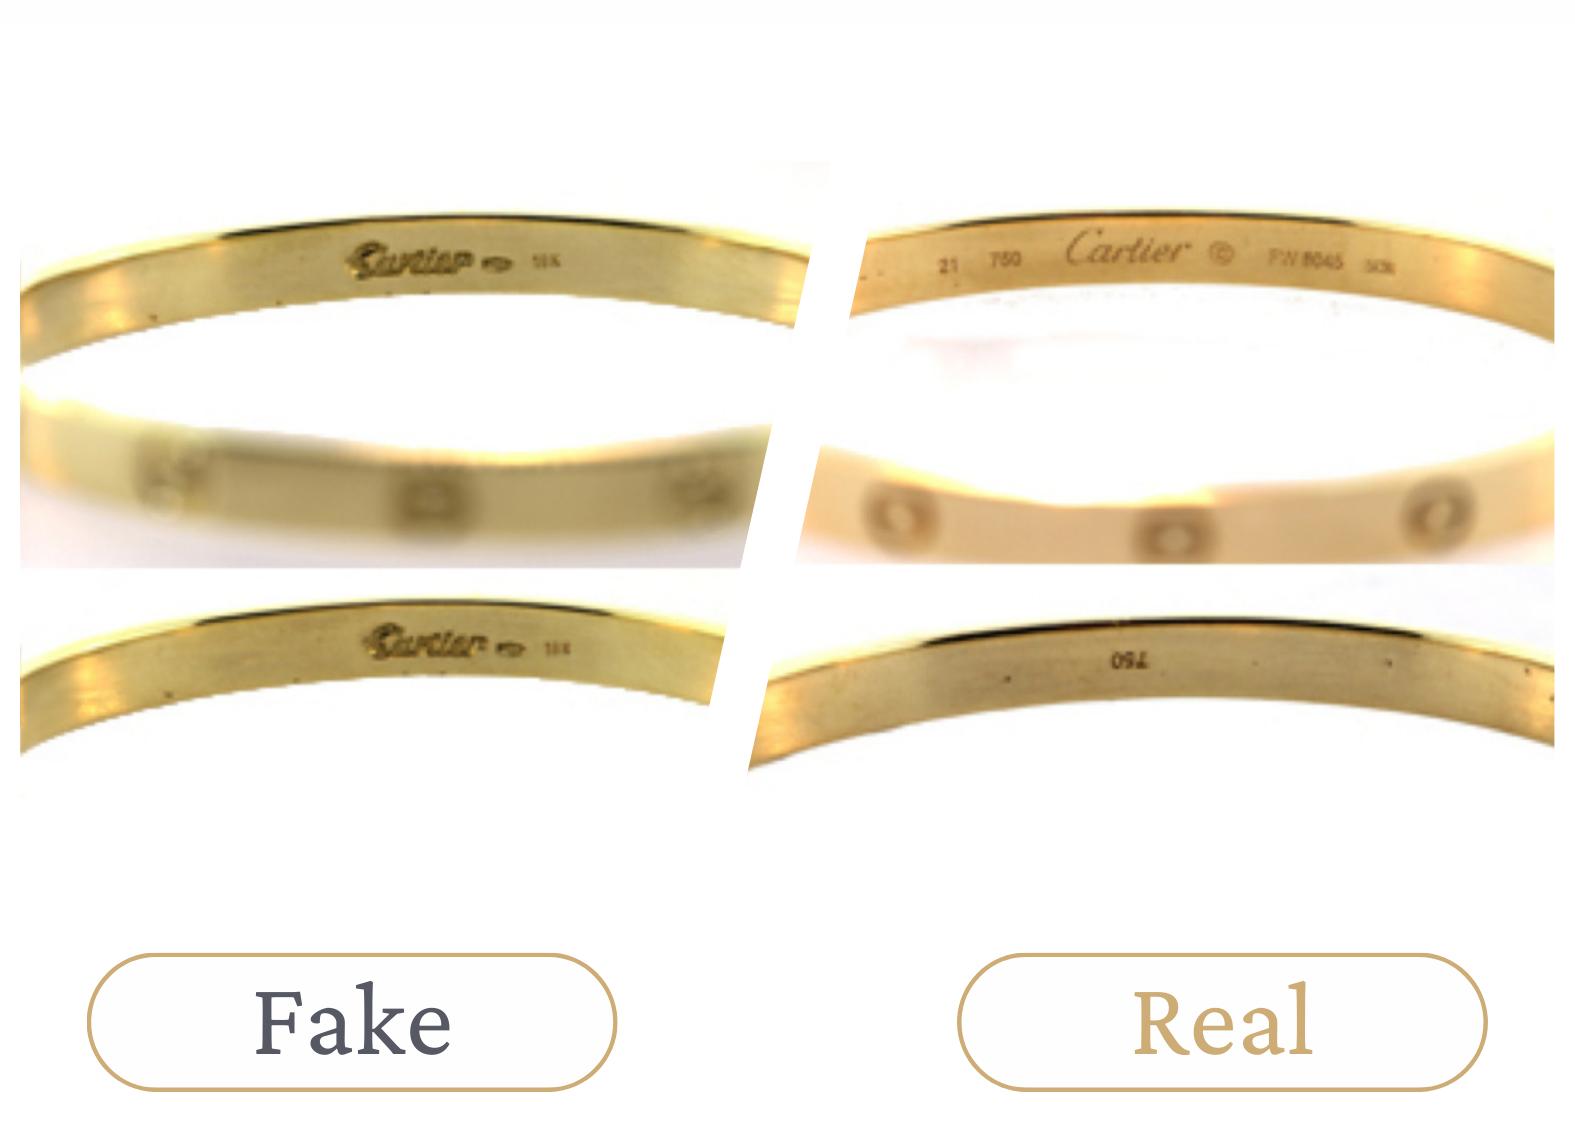 How to Spot A Fake Cartier Love Bracelet - fake vs real 1